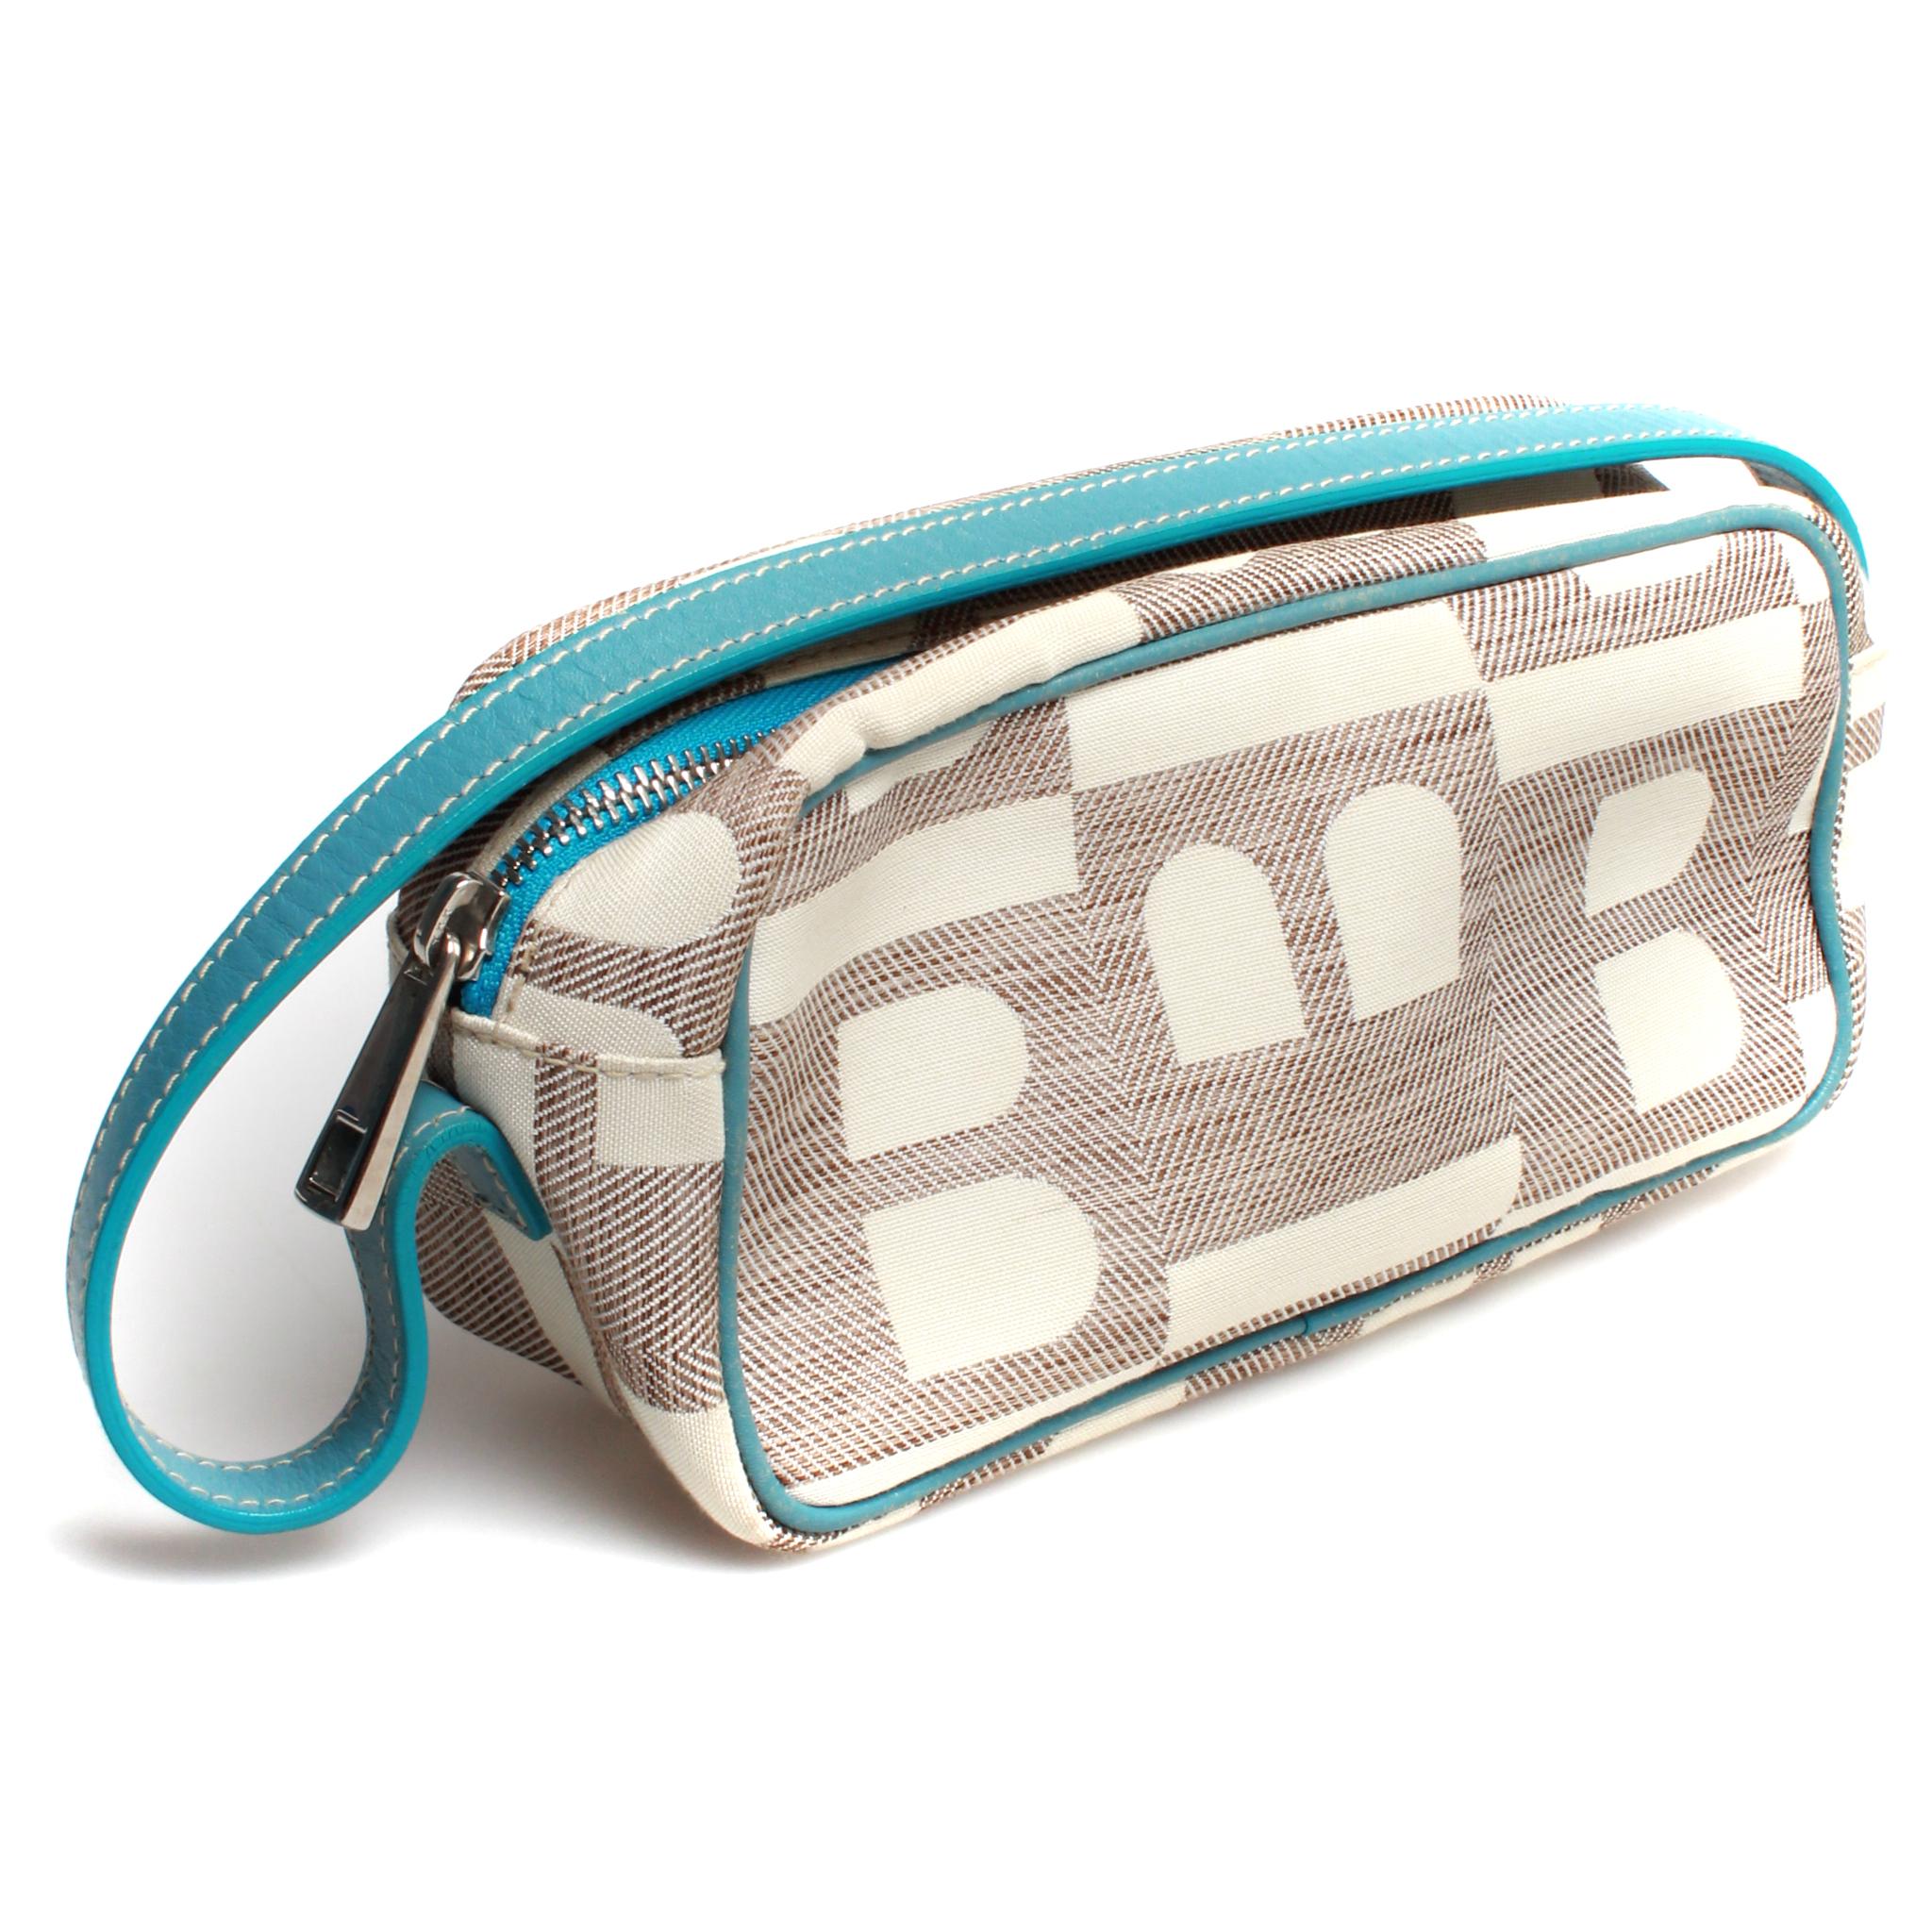 Cute as a button BALLY small clutch bag with blue strap with classic B monogram fabric. Can be used as makeup case, pencil case or casual day clutch.